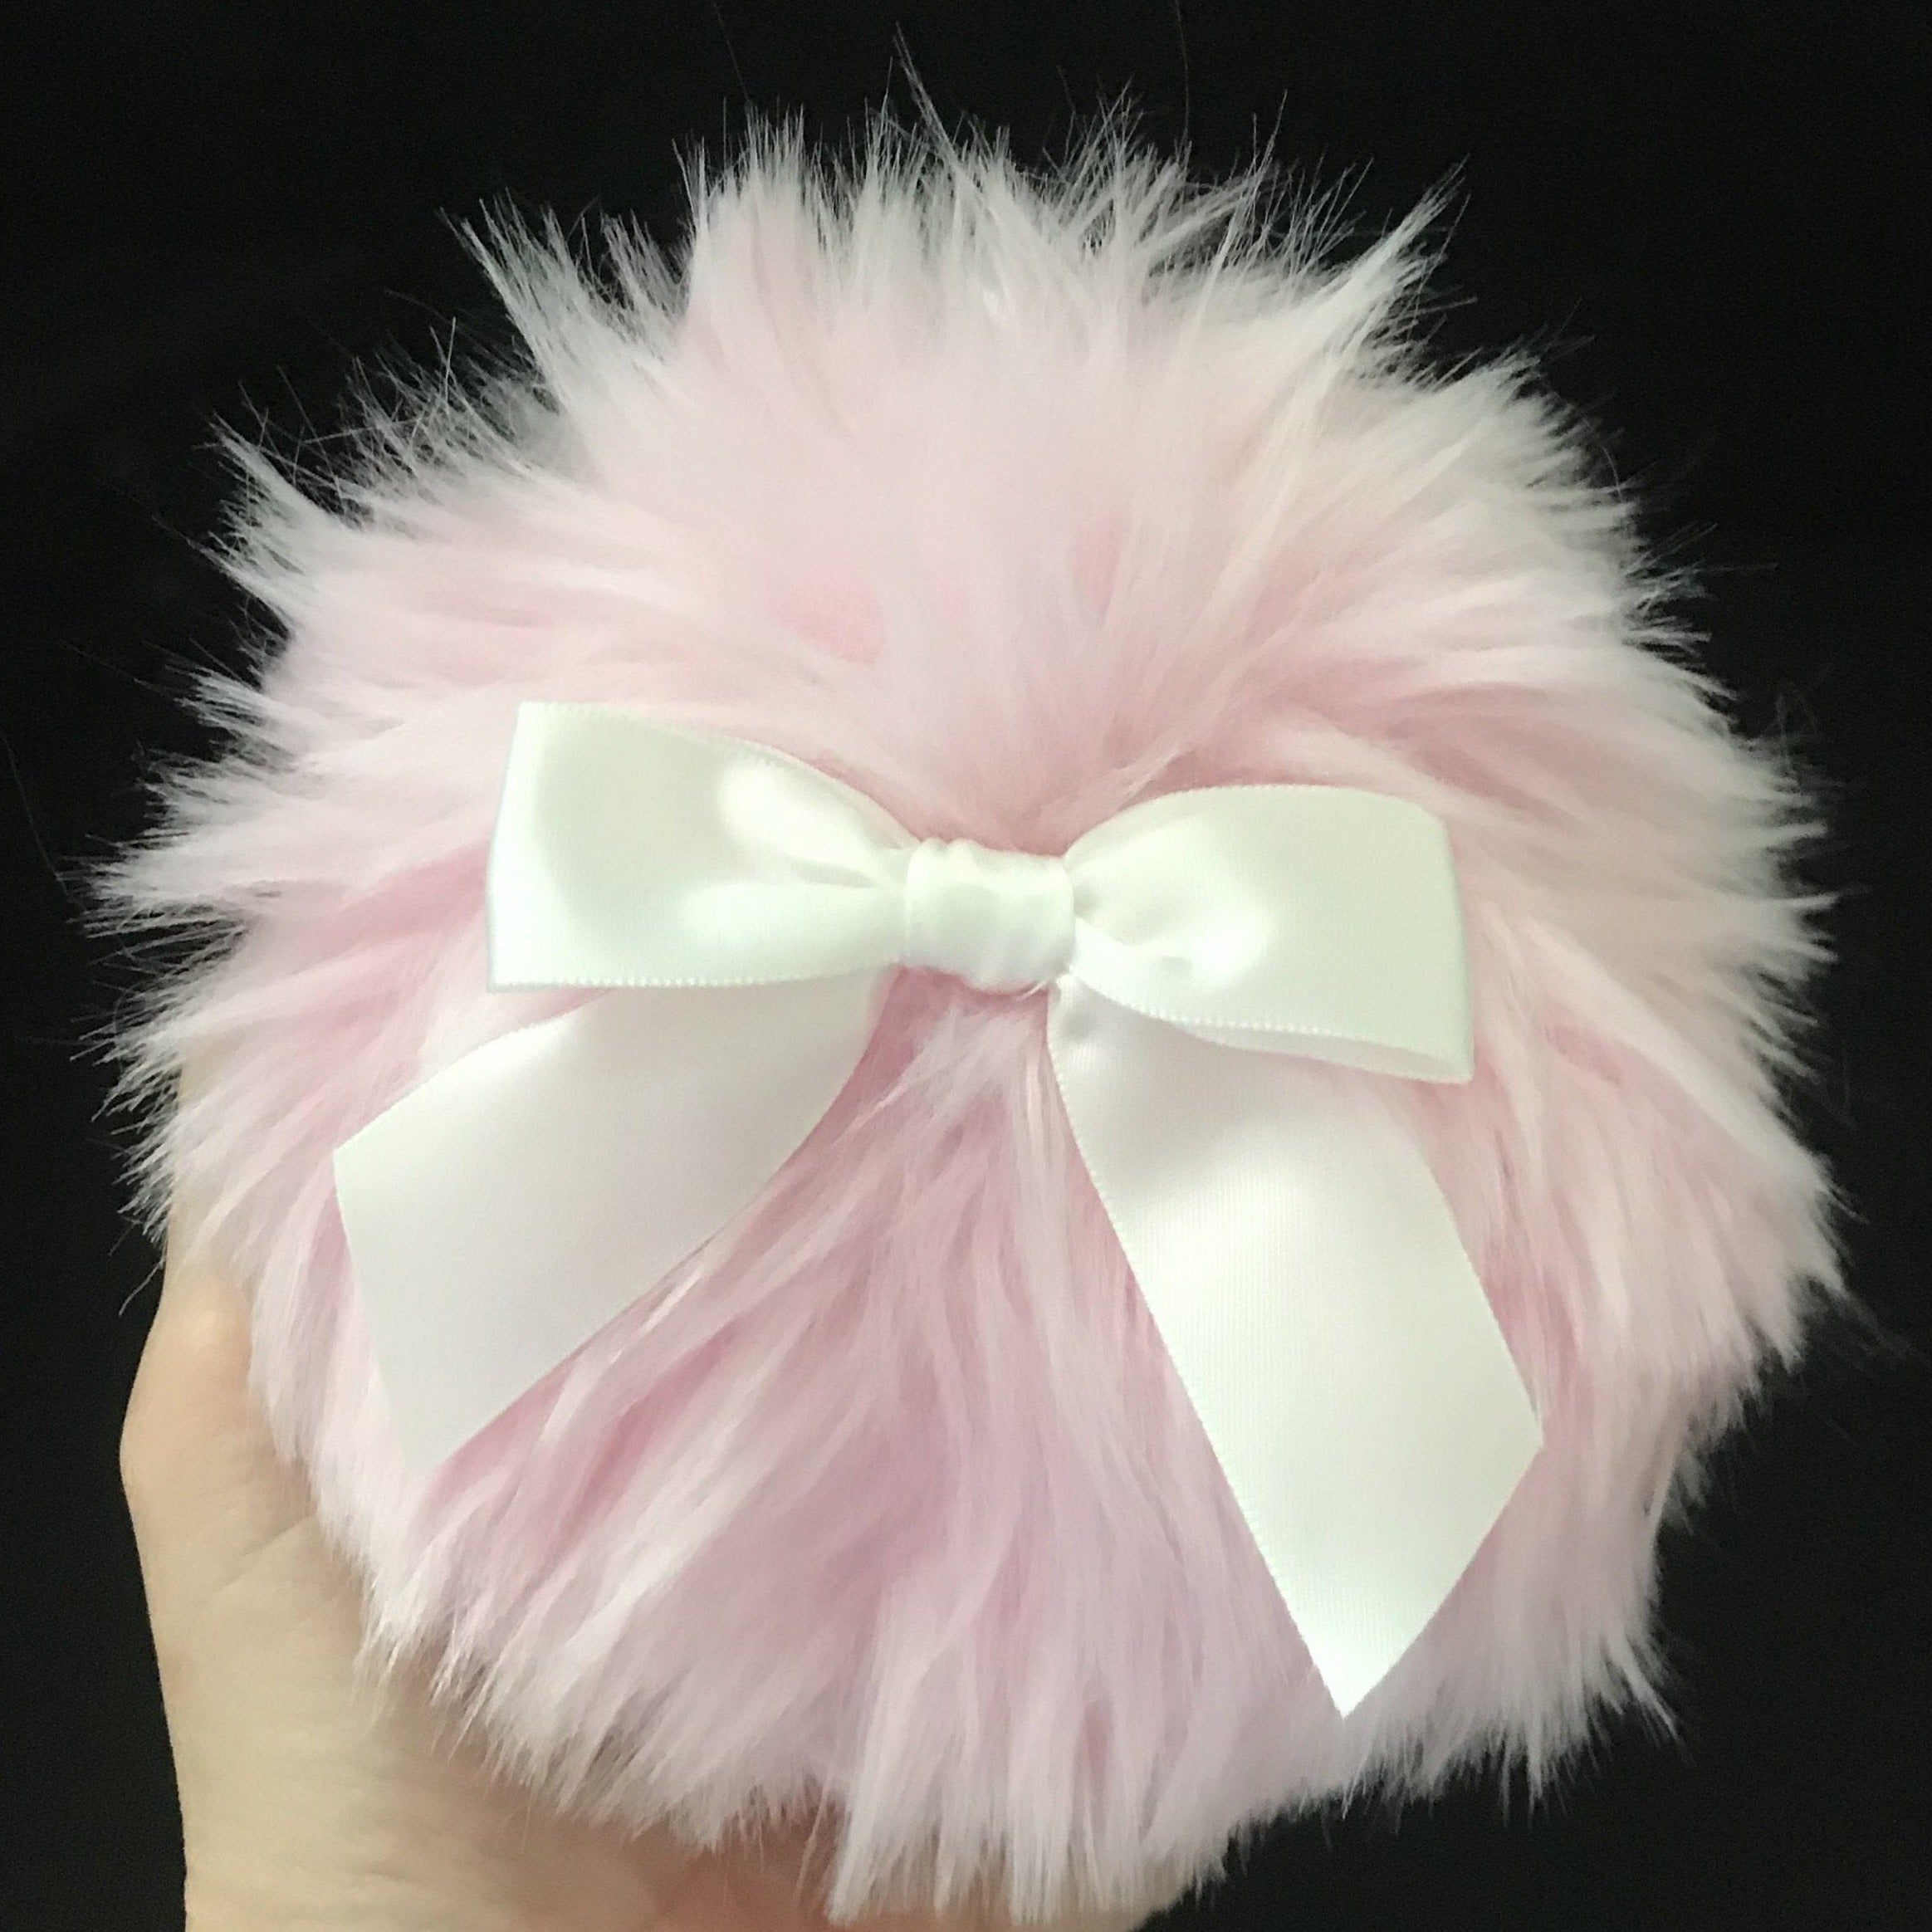 Accessories - Faux Fur Powder Puff - Large 5" - Pink